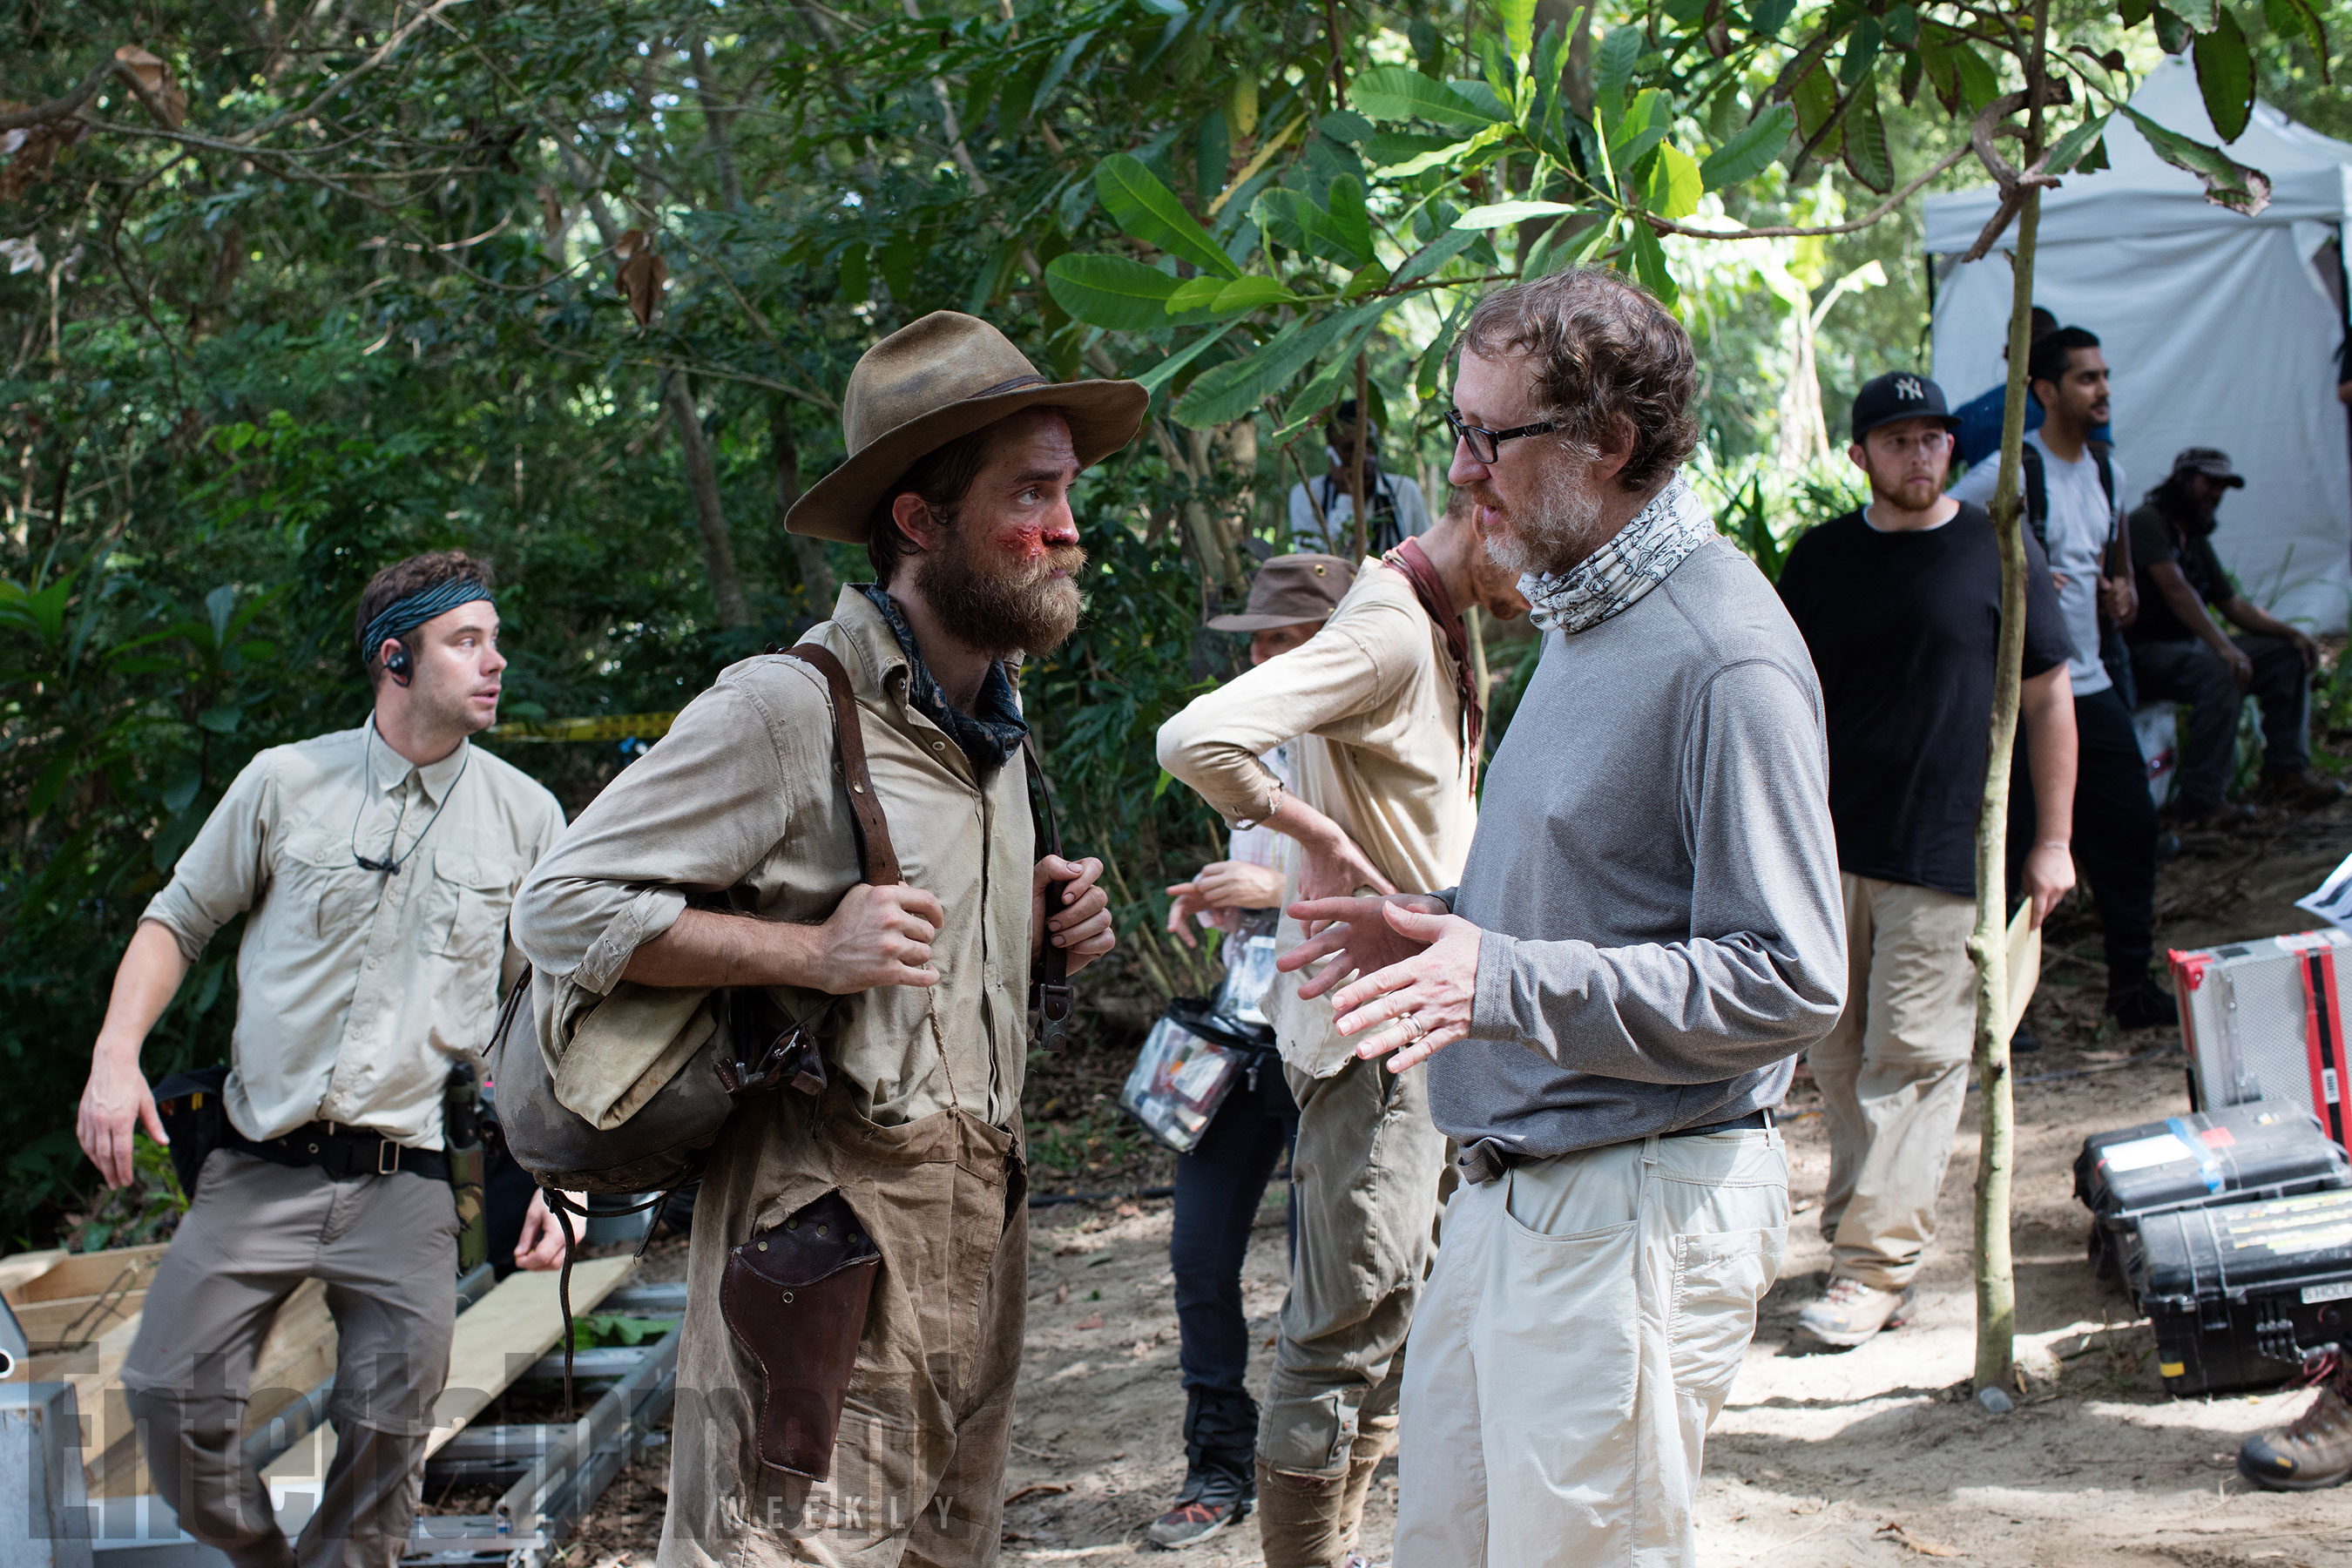 New BTS pics of Robert Pattinson on the set of 'Lost City of Z'. Thinking of Rob